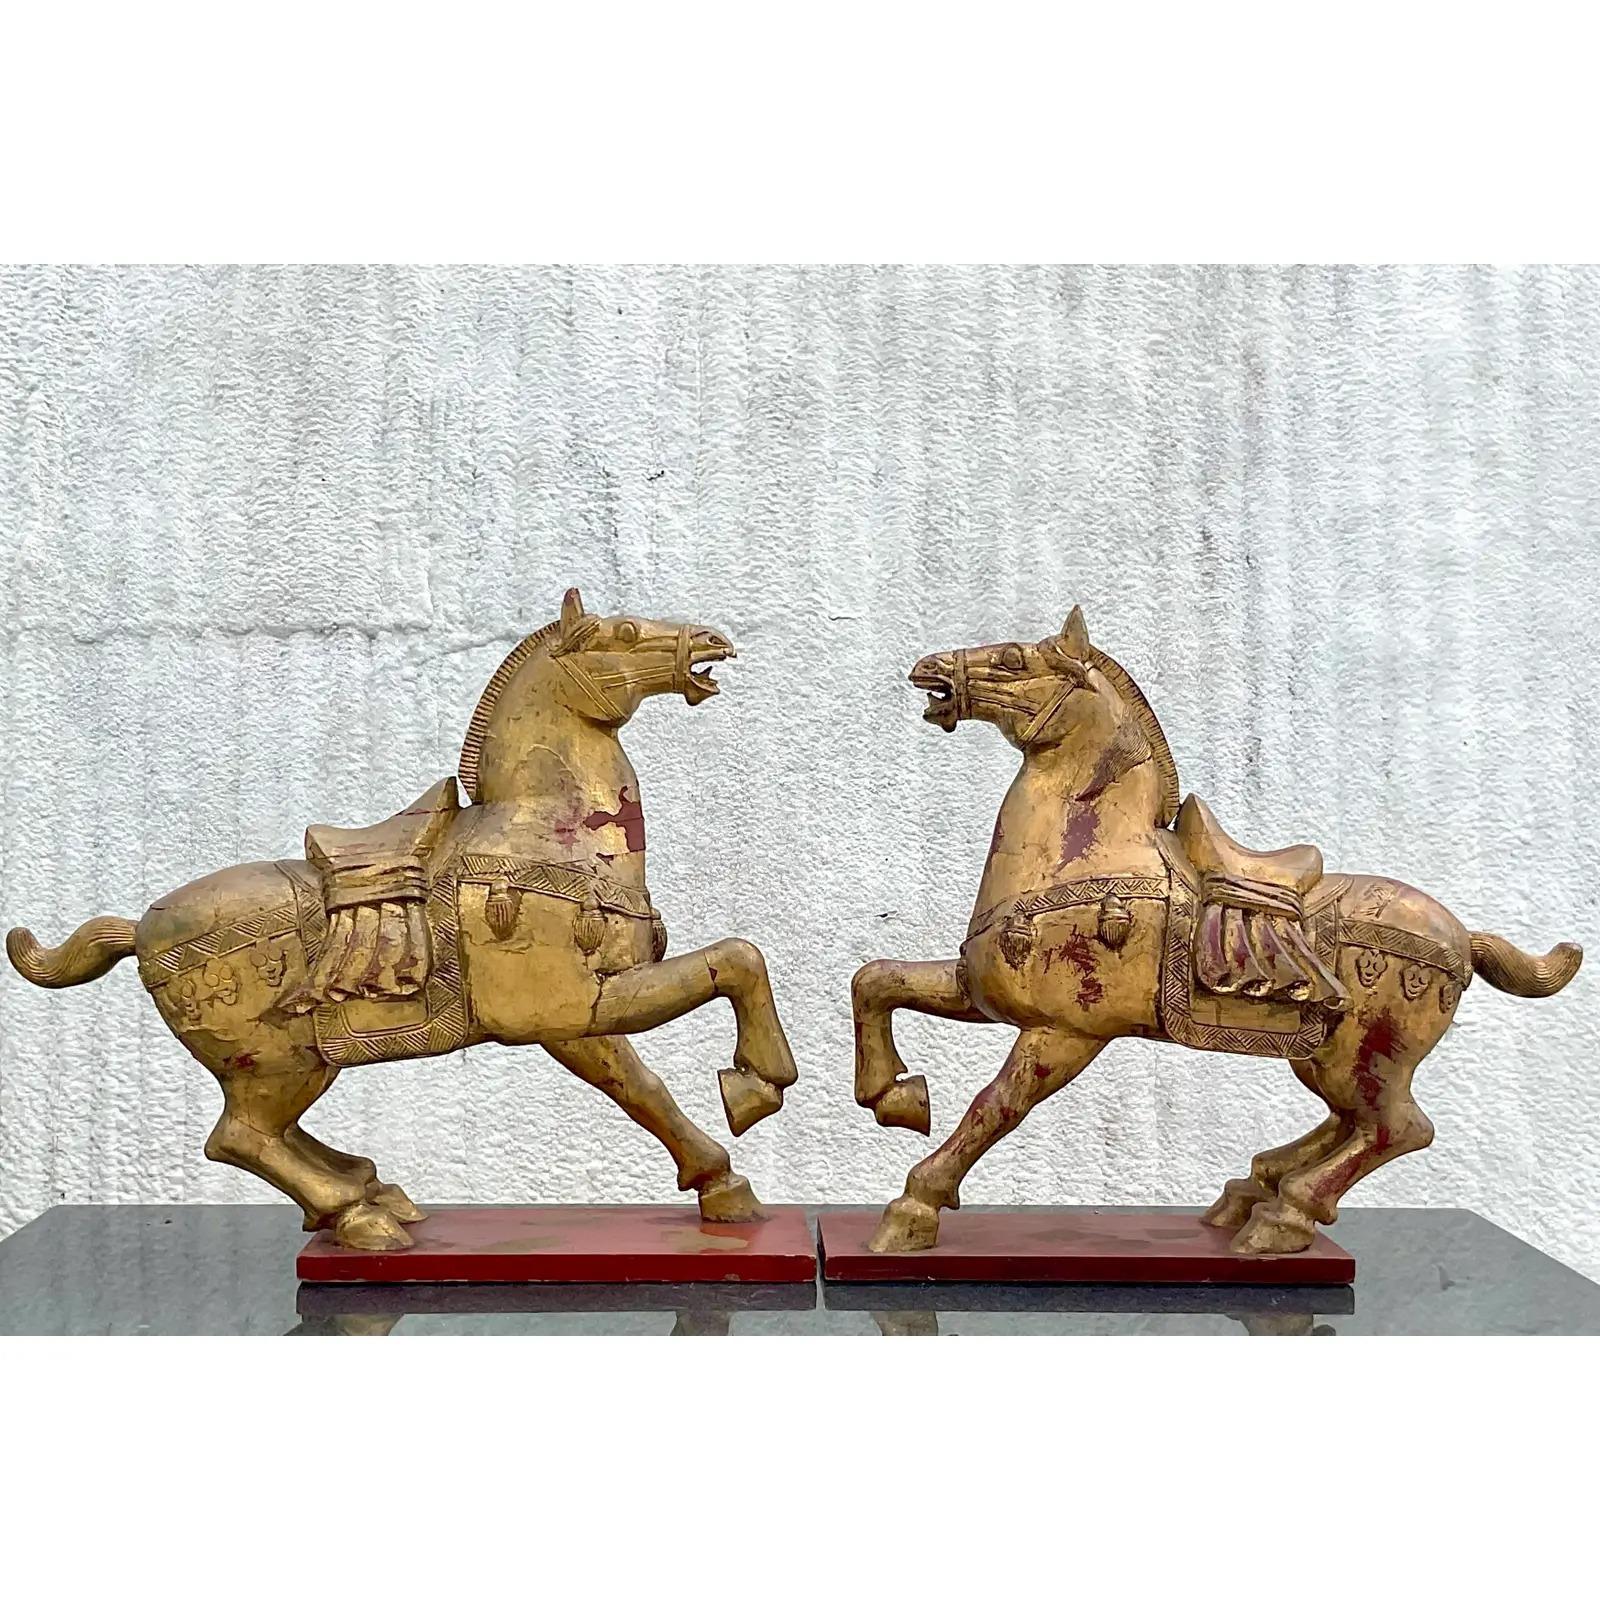 Vintage Asian Gilt Carved Wooden Emperor Horses - a Pair For Sale 1